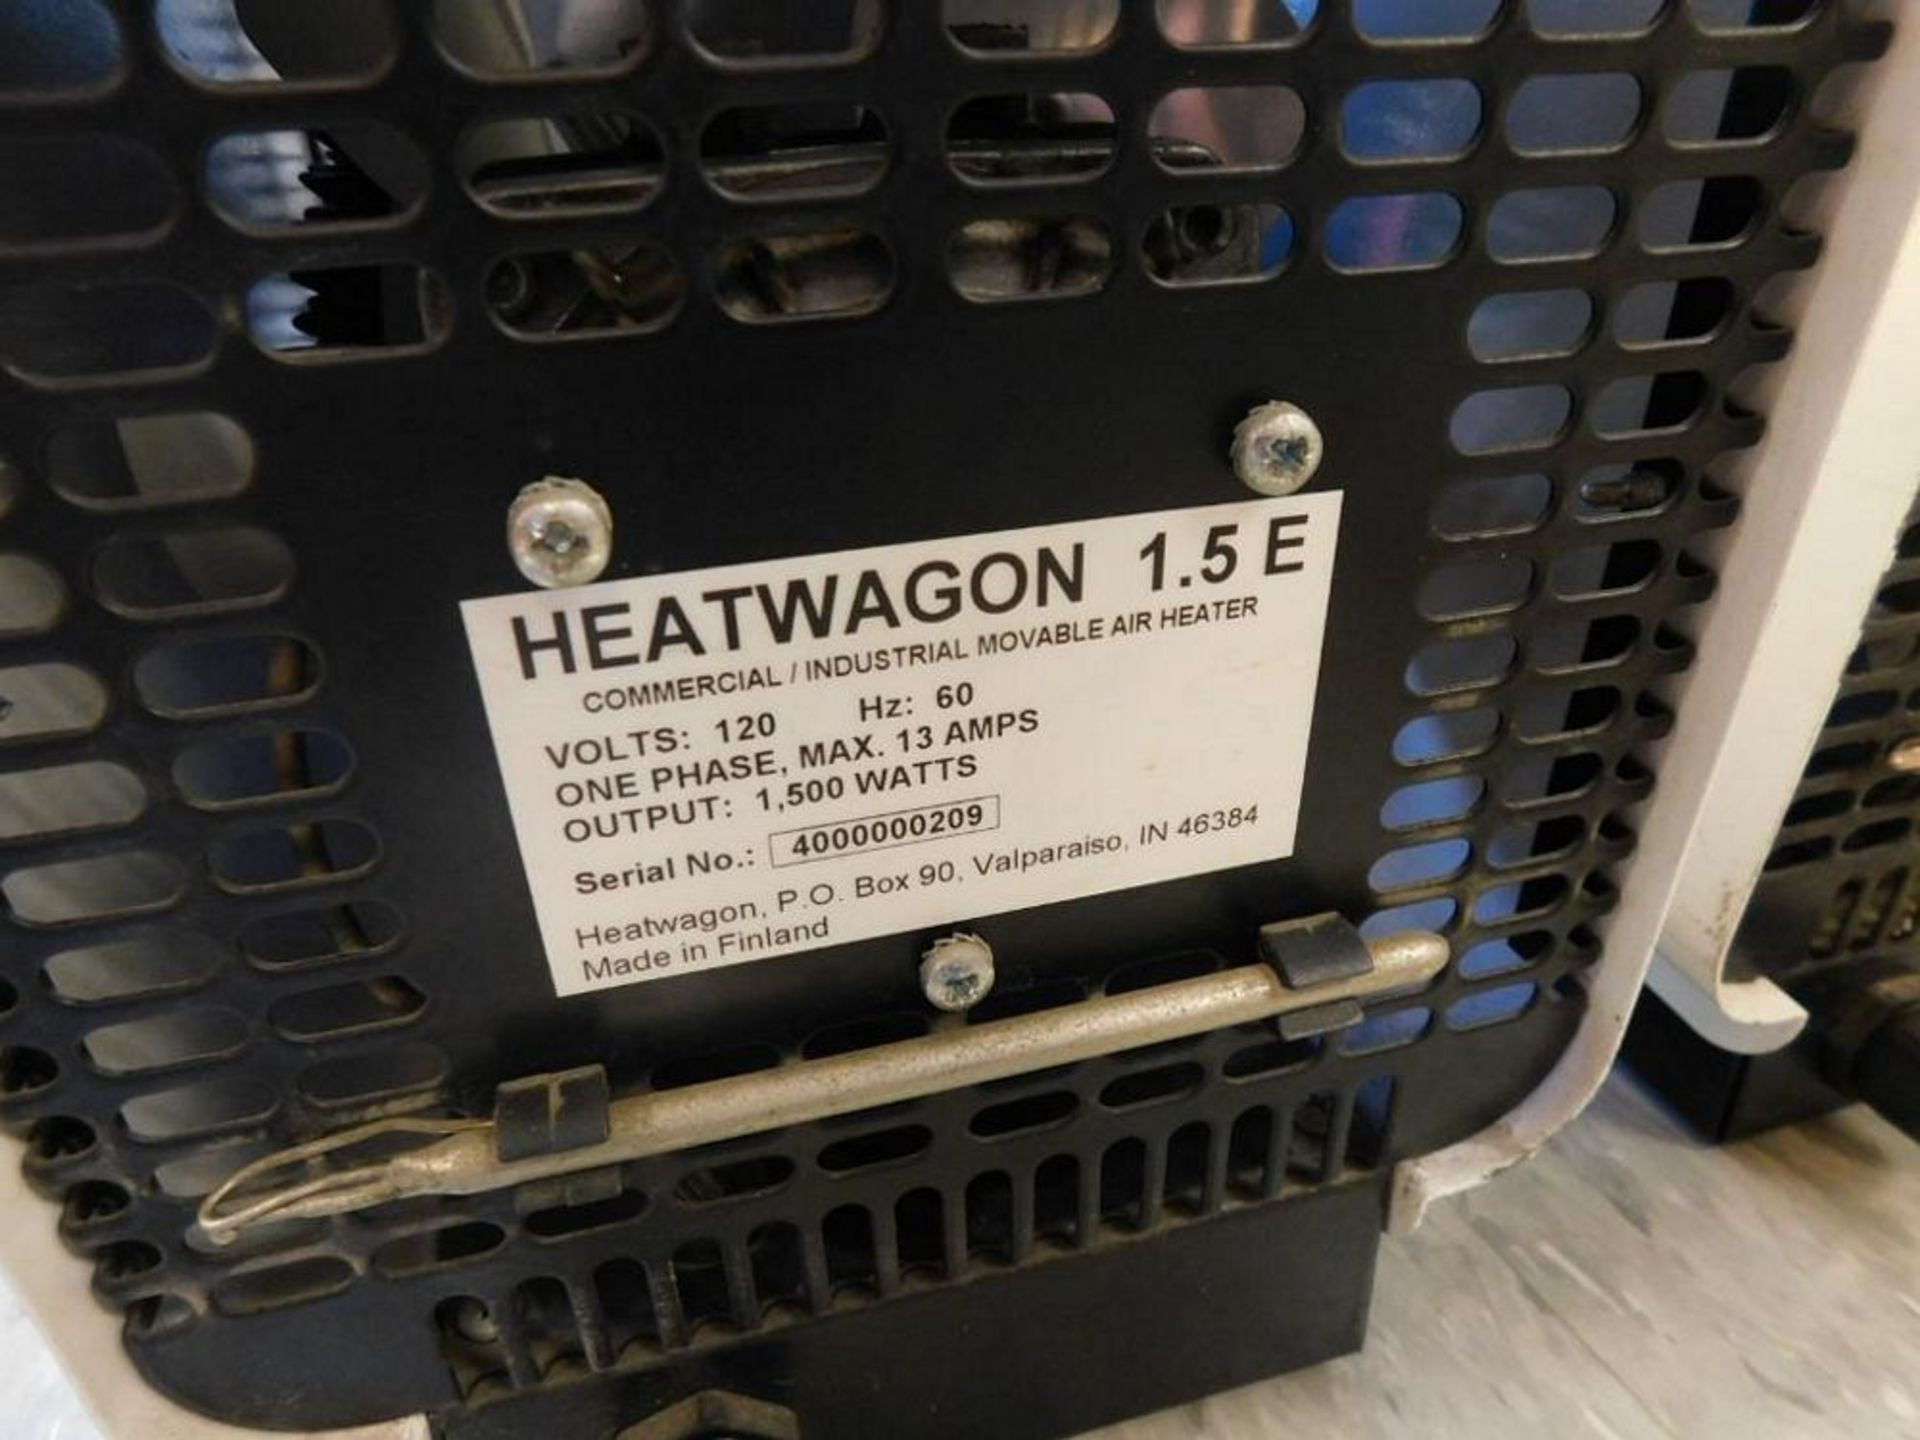 LOT: (2) Heat Wagon 1,500 watt Commercial/Industrial Movable Air Heaters (LOCATION: 318 N. Milwaukee - Image 4 of 4